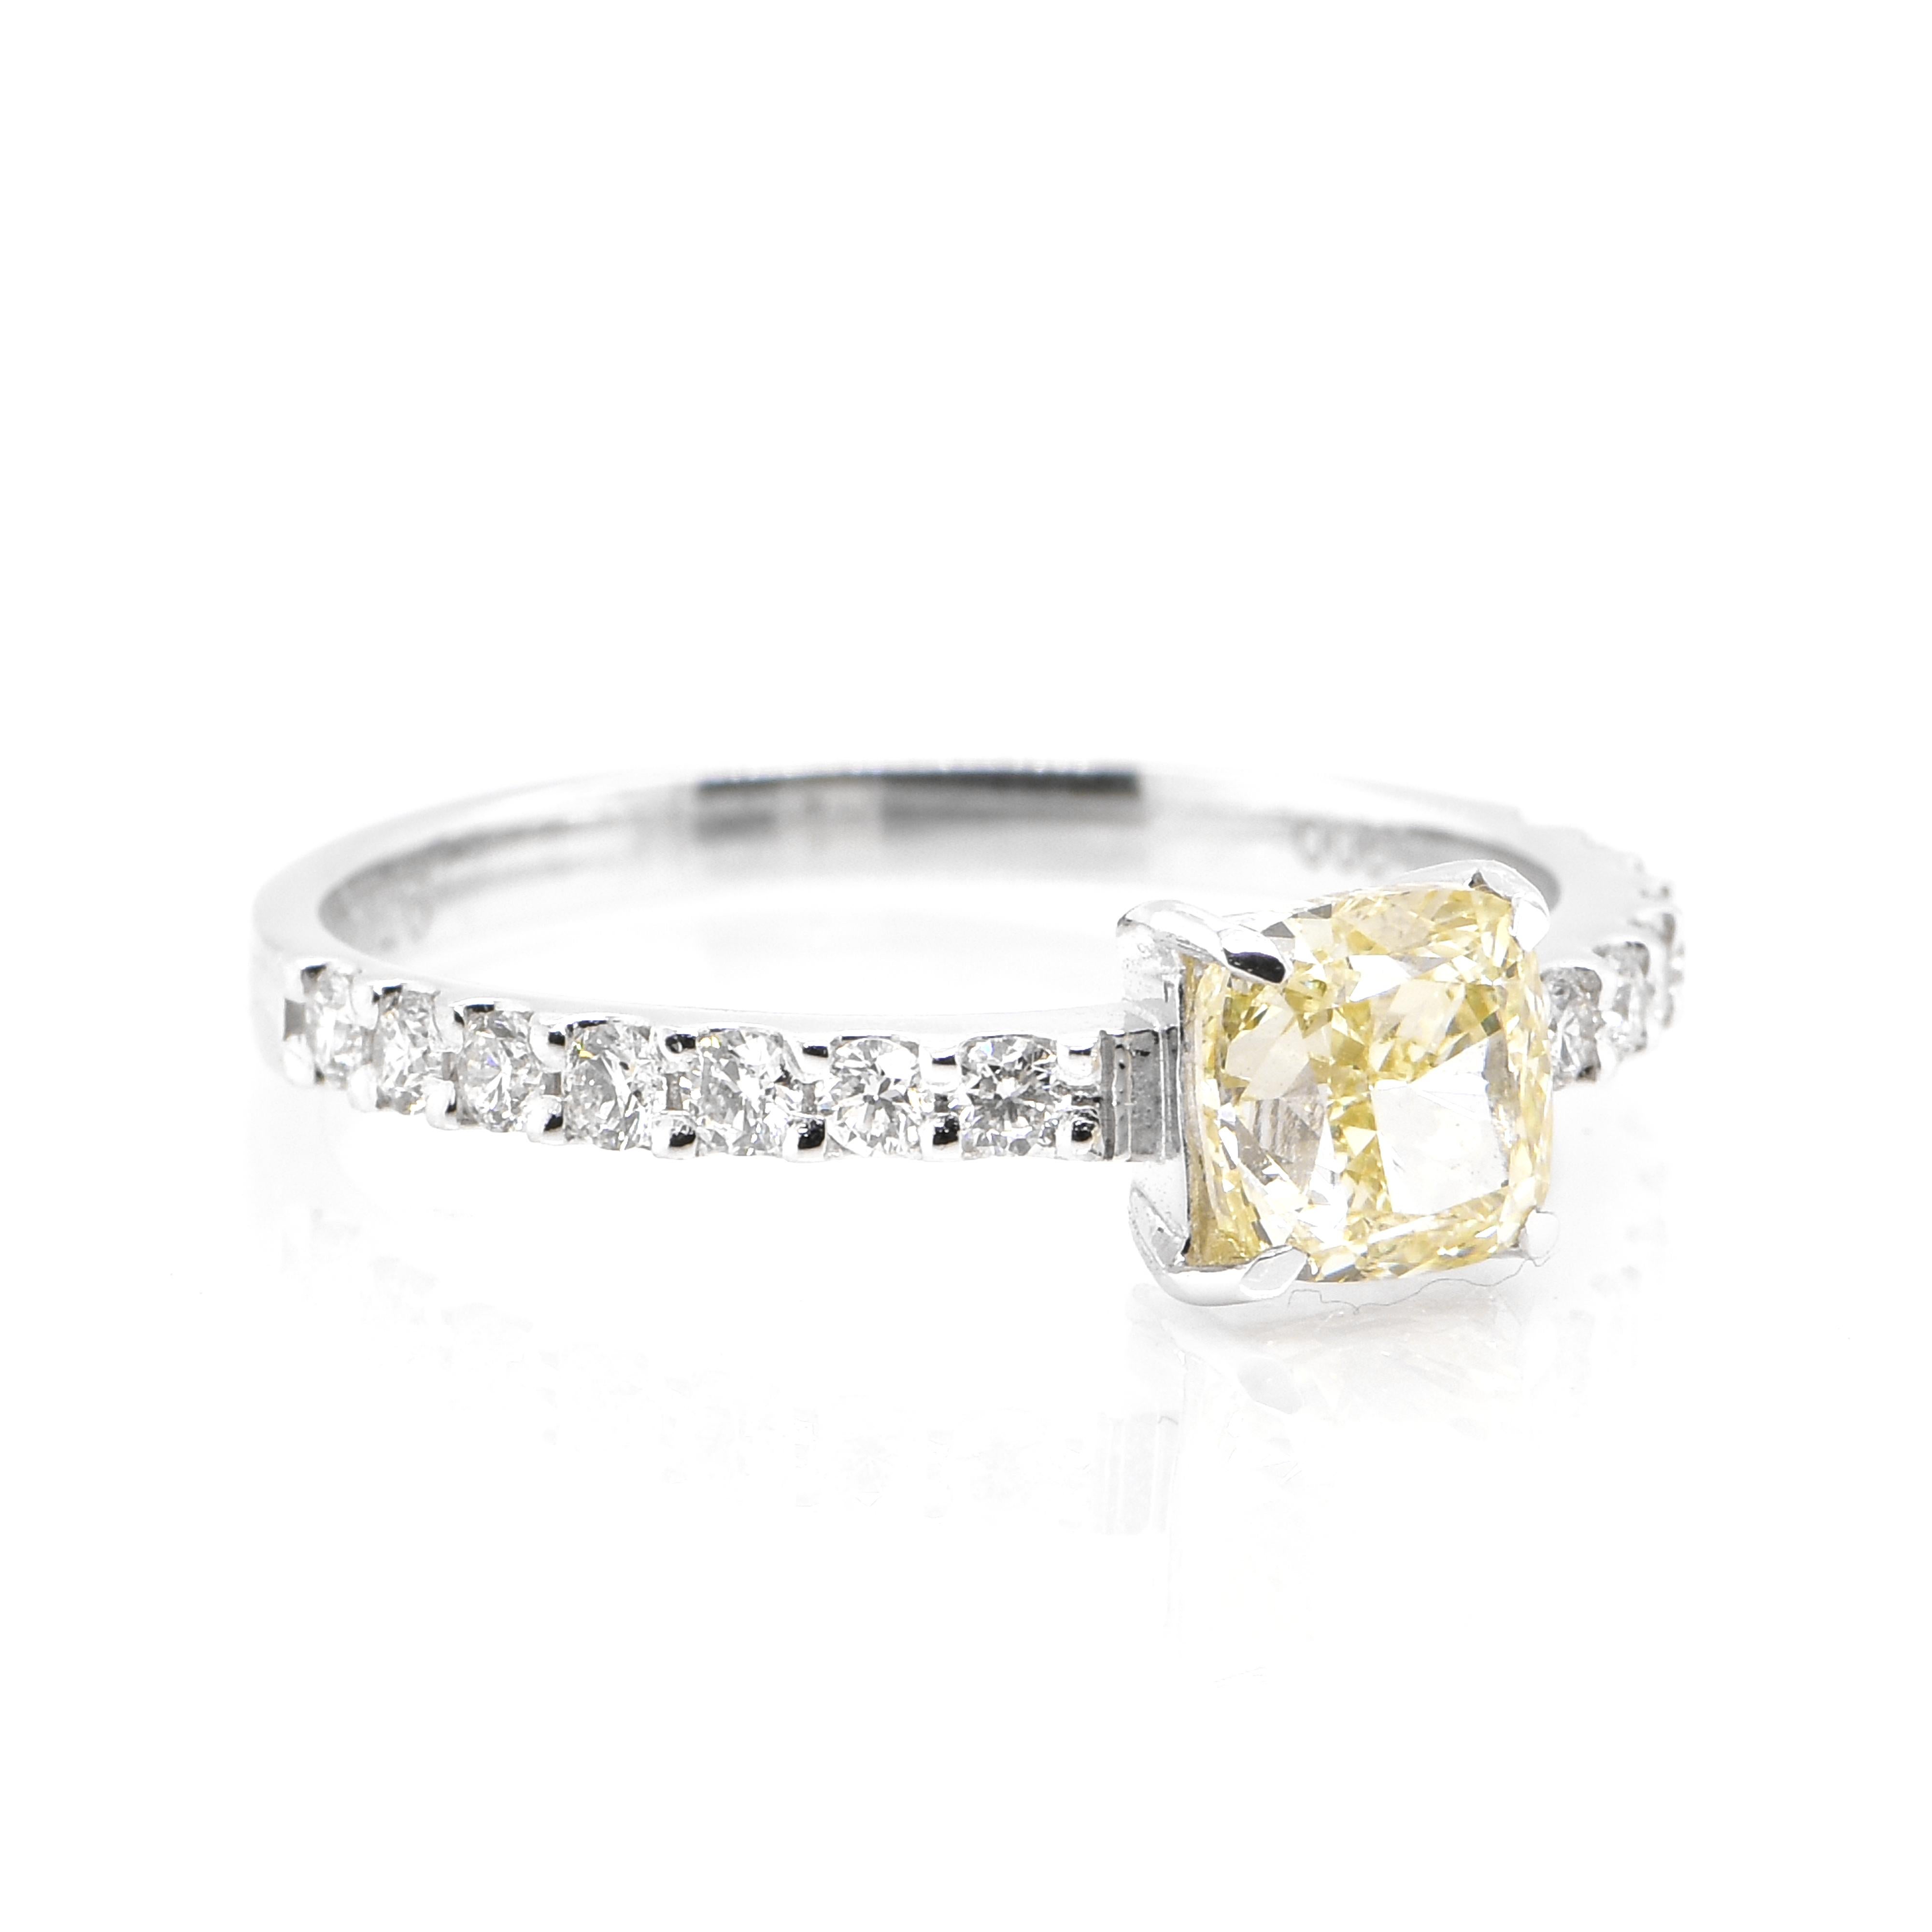 Modern 1.002 Carat, VS-1, Light Yellow, Earth-Mined Diamond Ring made in Platinum For Sale